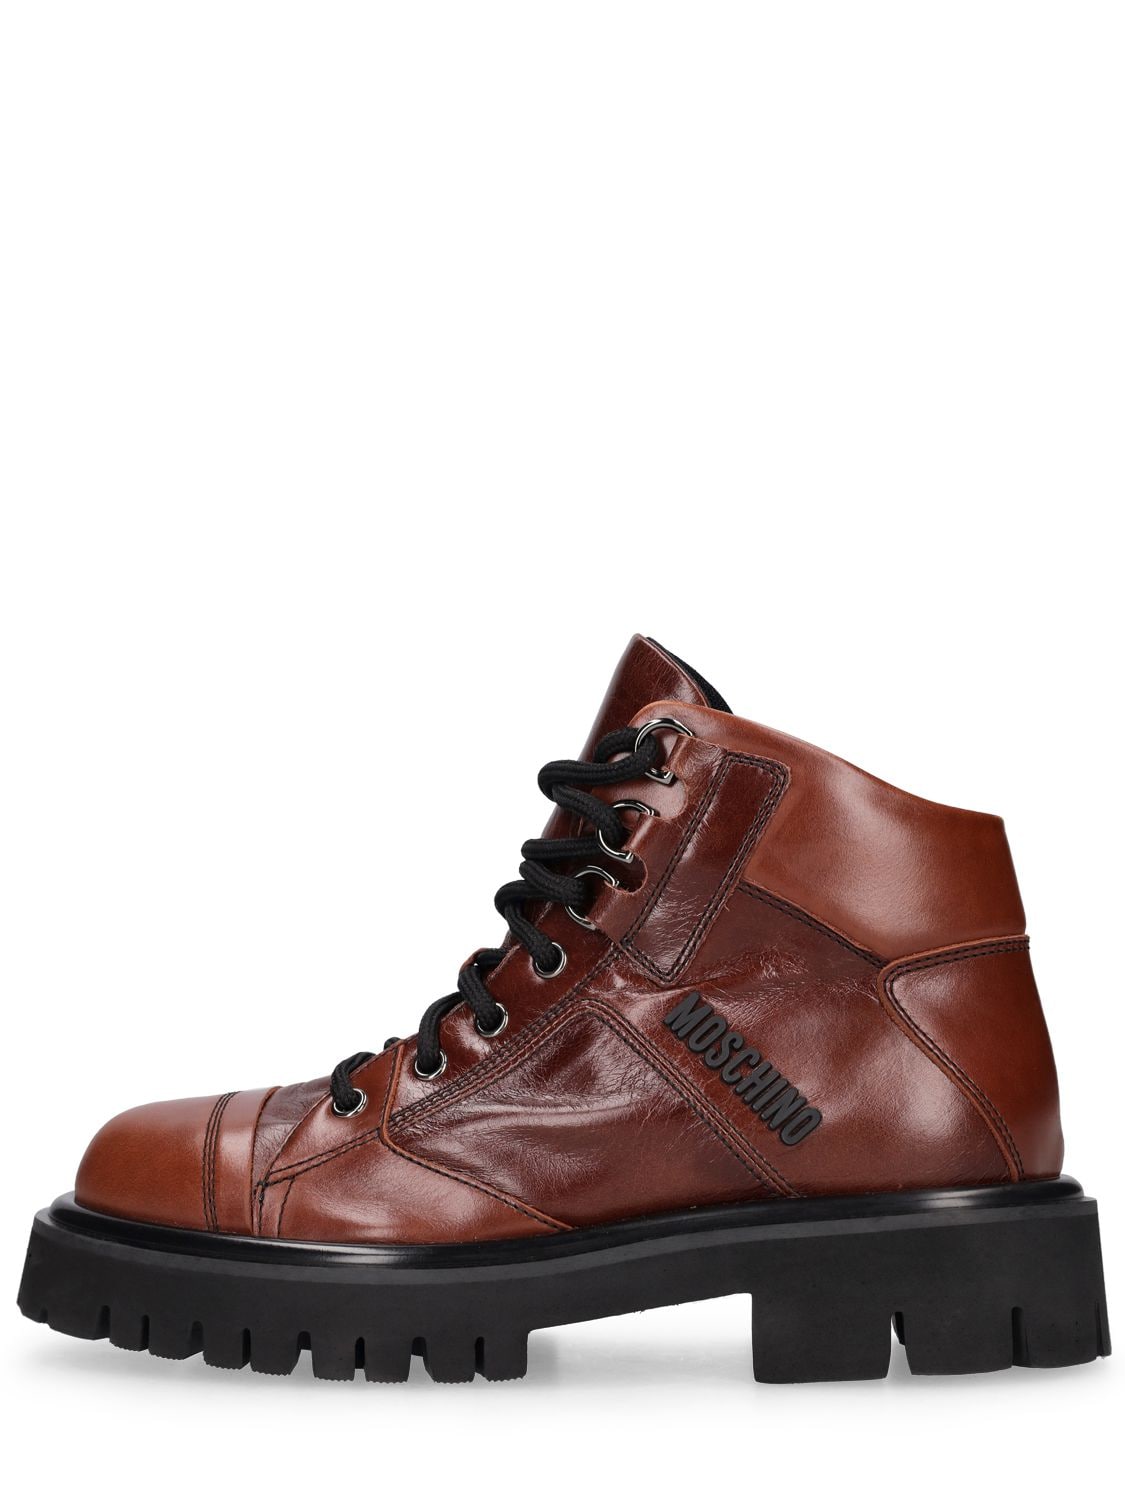 MOSCHINO 40mm Combat Sole Leather Hiking Boots